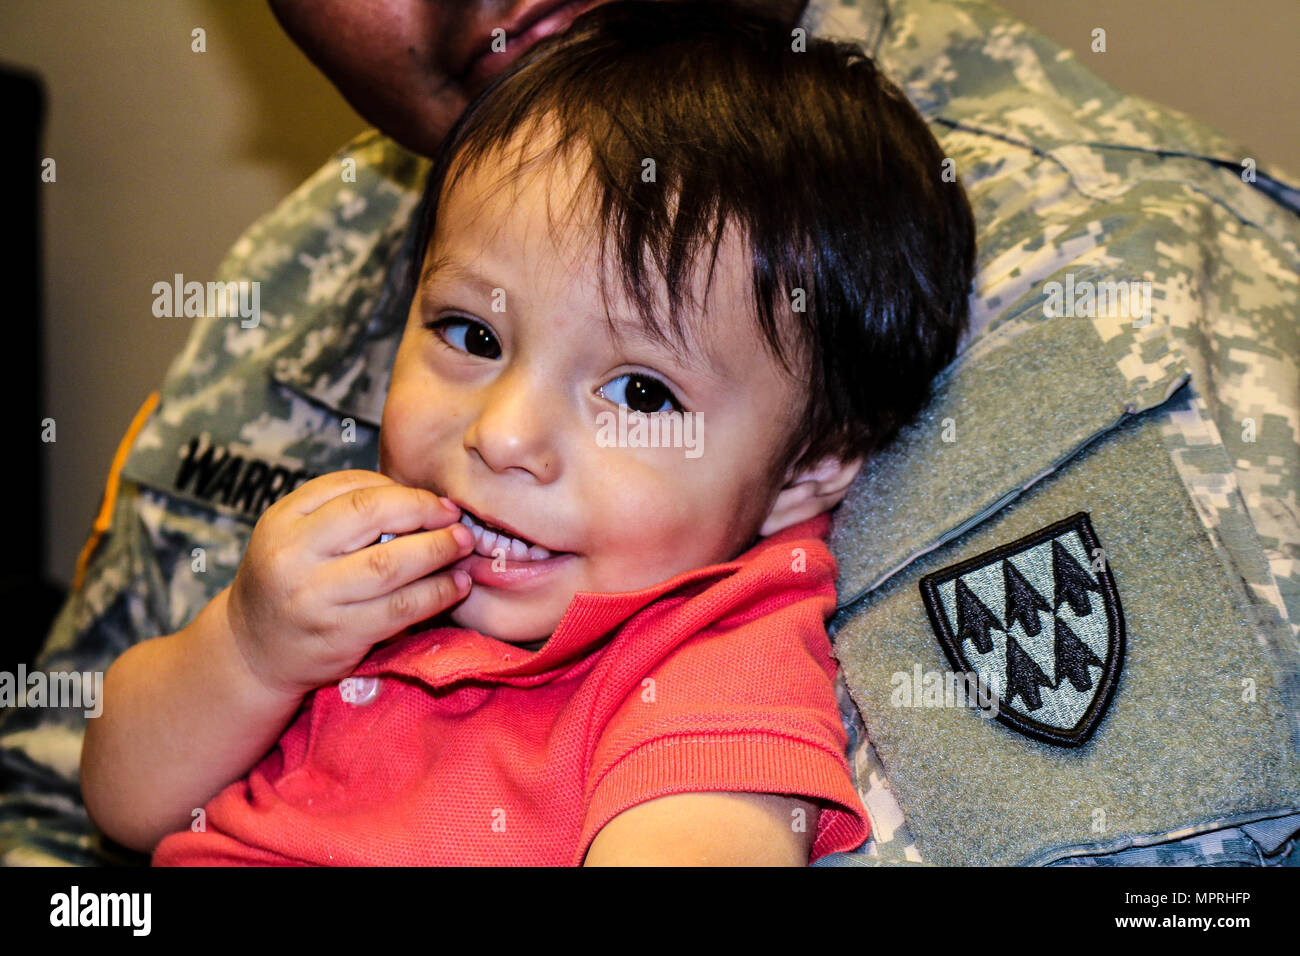 William Ezra Warren is held by his father, Sgt. William Thomas Warren Jr., United States Army Space and Missile Defense Command, at Headquarters and Headquarters Battery, 32nd Army Air and Missile Defense Command, Fort Bliss, Texas, April 6, 2017. During his emergency leave, the unit took charge of transferring him to 32nd AAMDC in order to stay with his family through the recovery process. (U.S. Army photo by Sgt. Aura E. Conejos, 32d AAMDC Public Affairs) Stock Photo